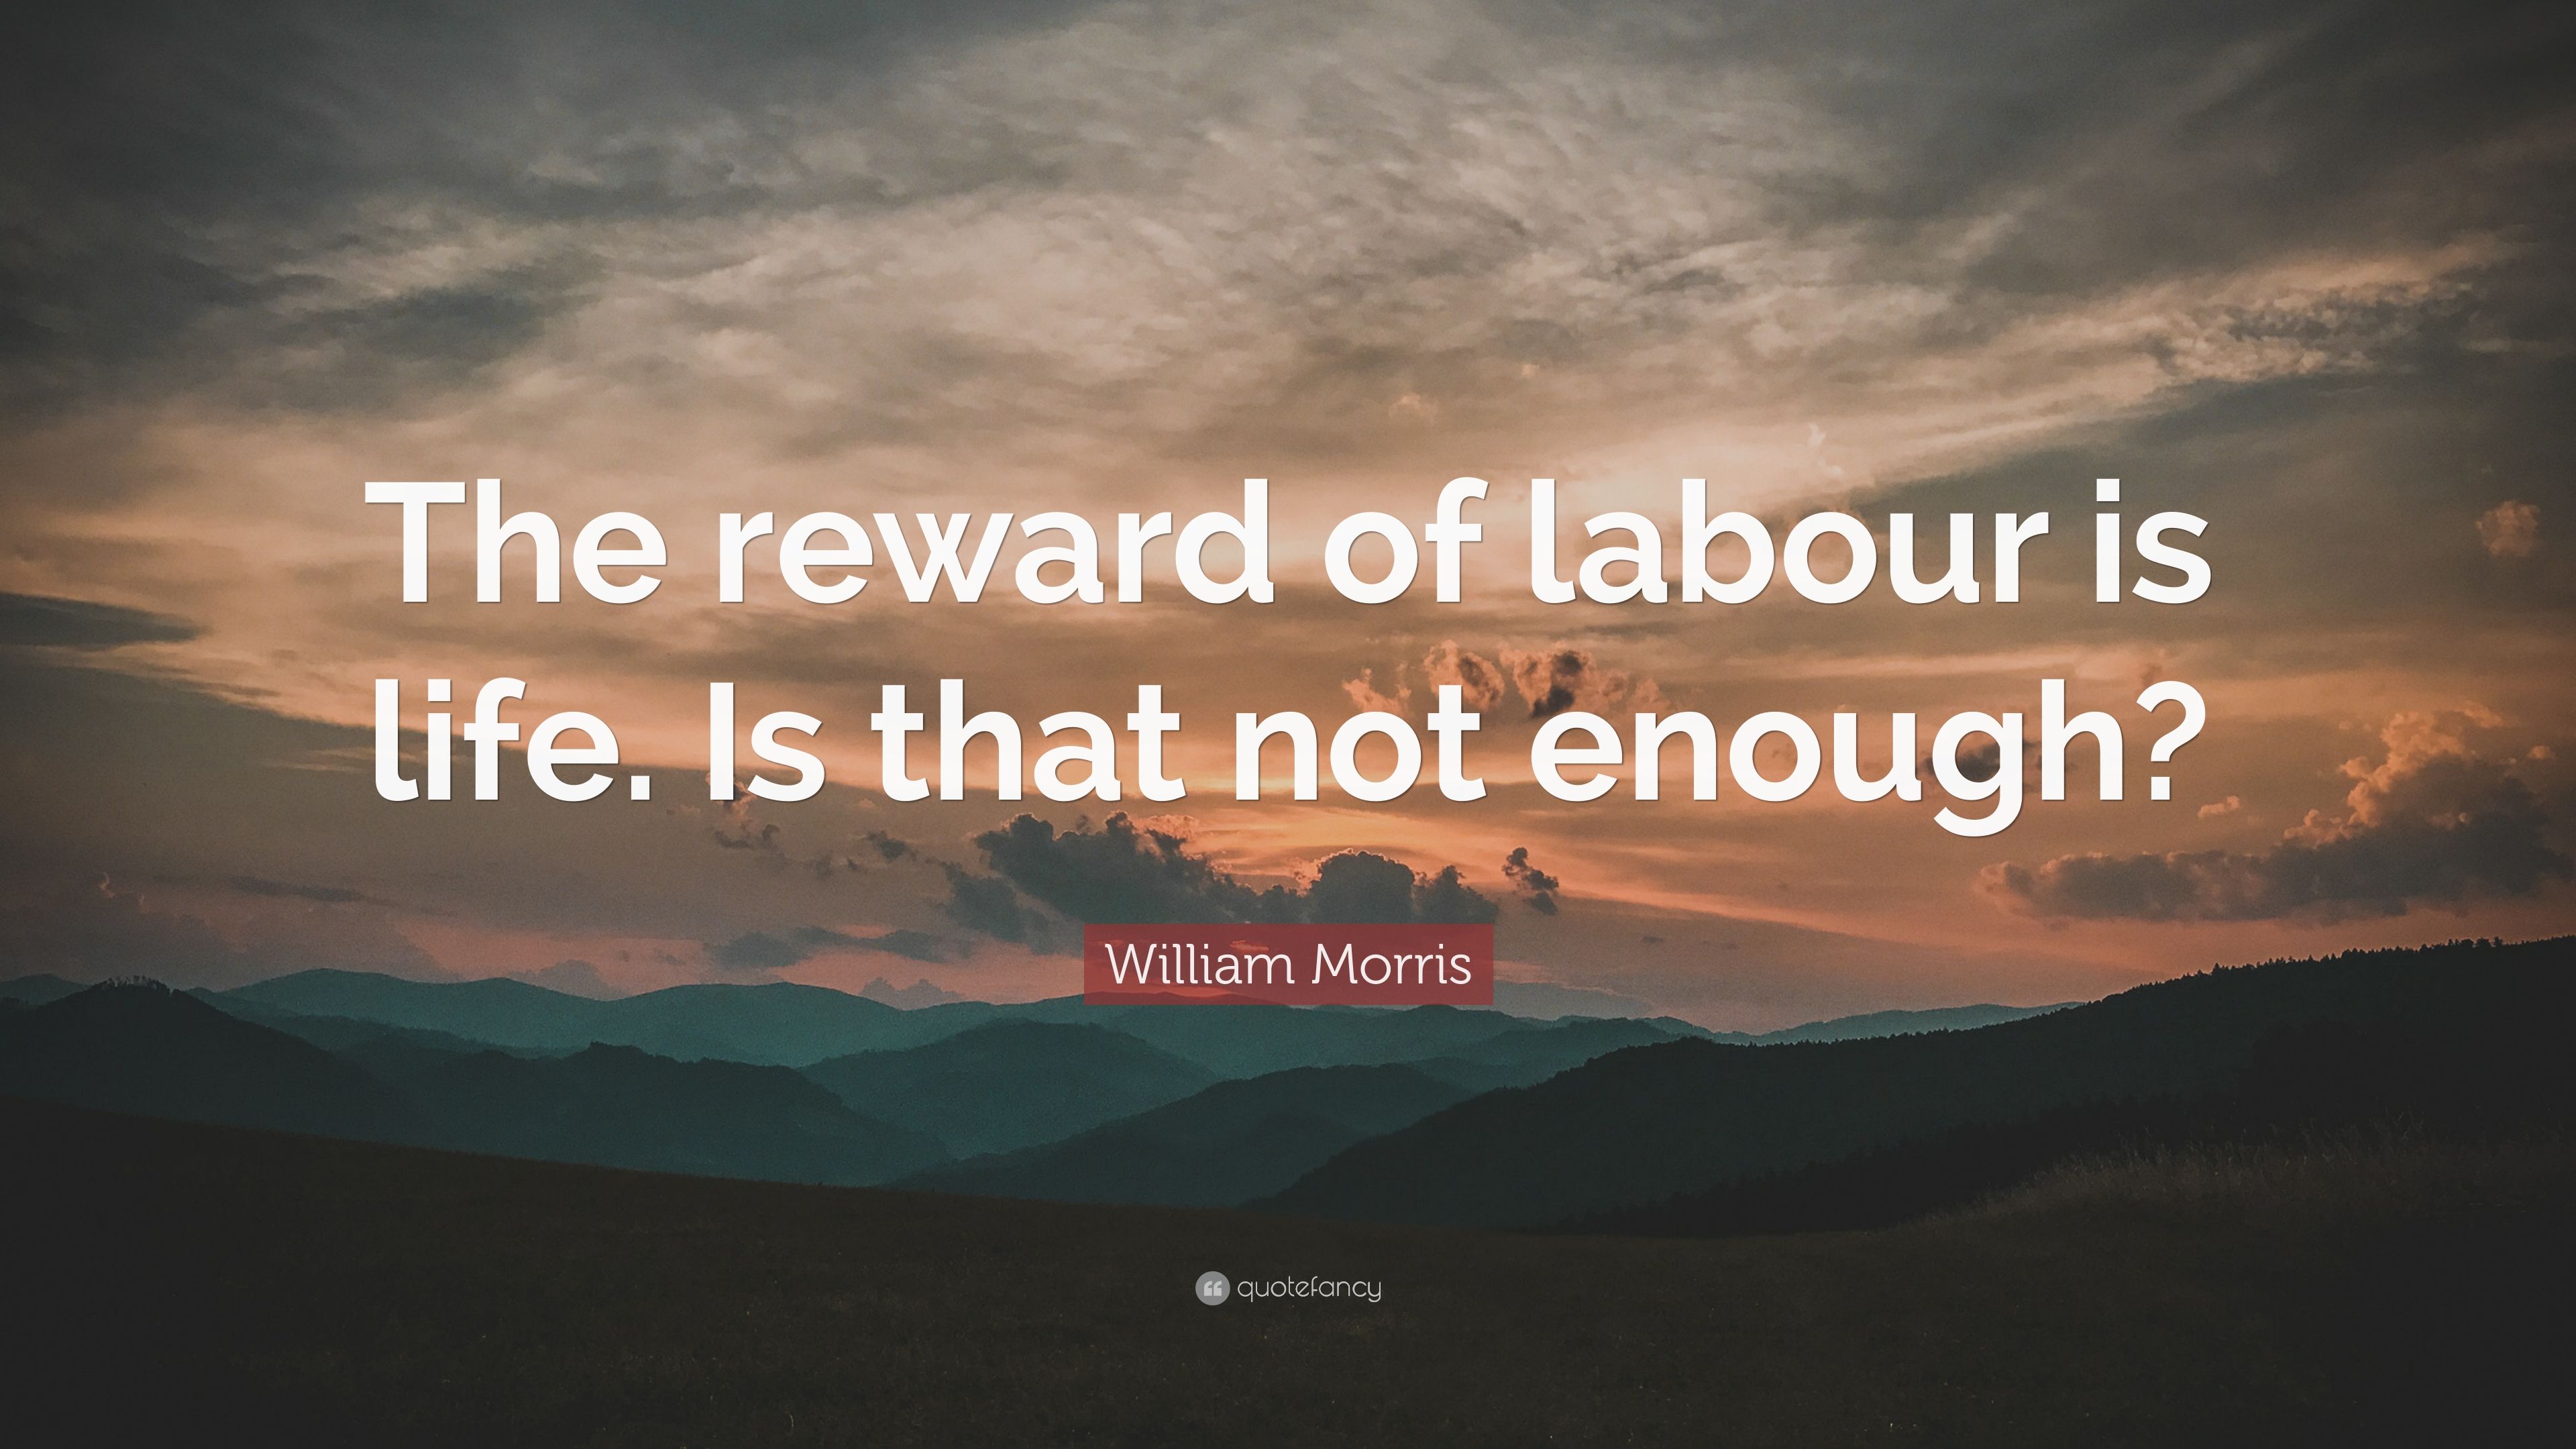 William Morris Quote: “The reward of labour is life. Is that not